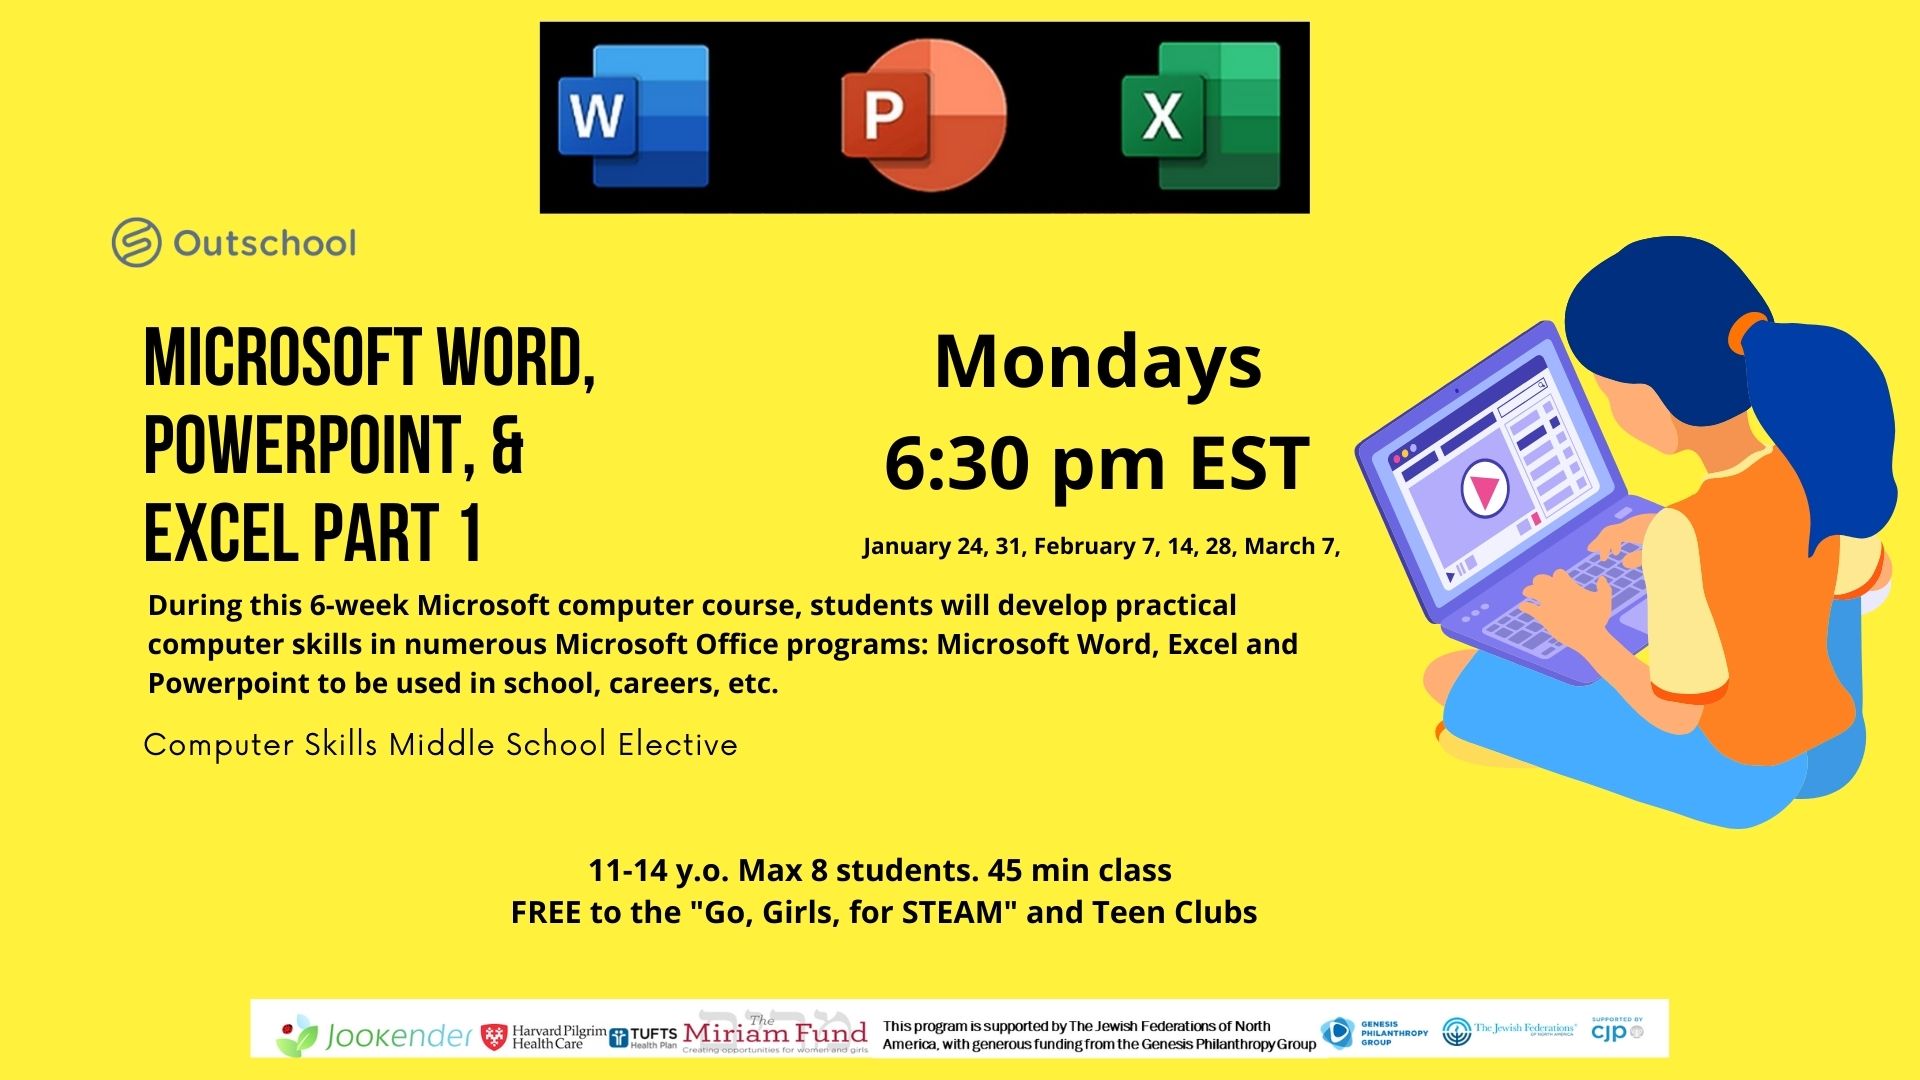 Microsoft Word, Powerpoint & Excel, Part 1